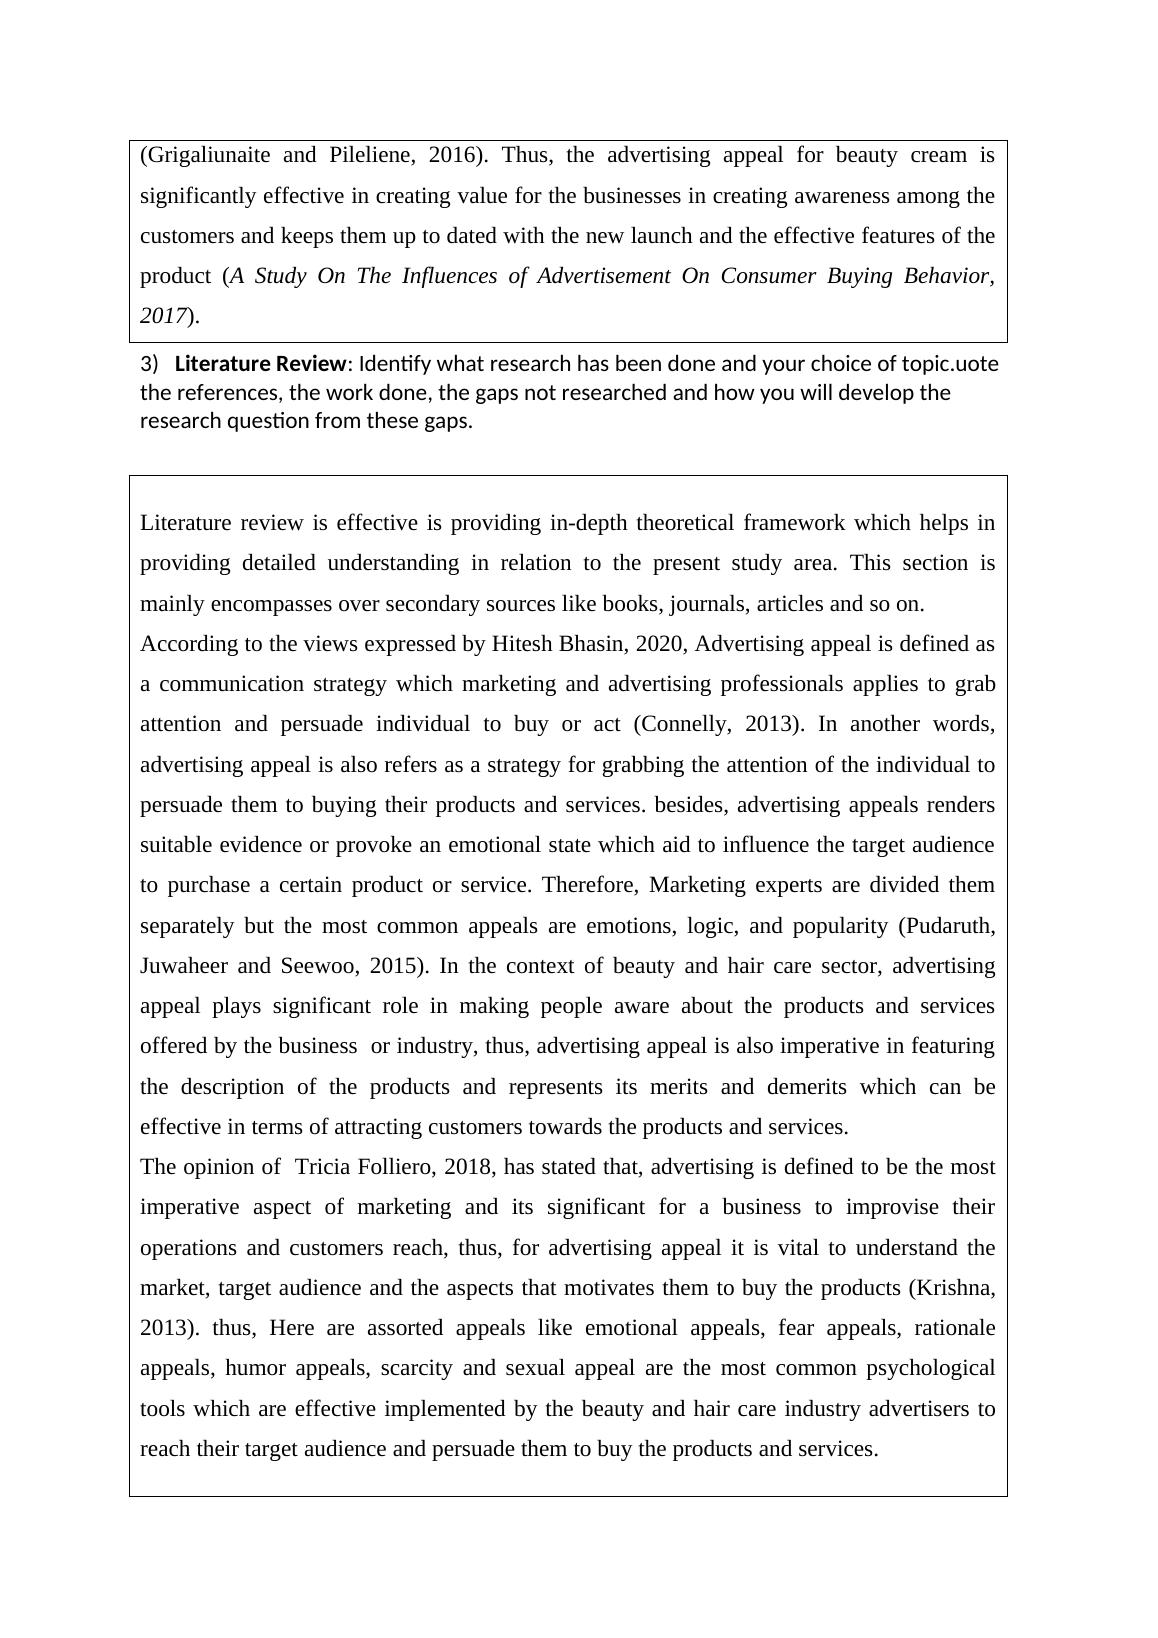 Influence of Advertising Appeal on Consumer Buying Behavior in Beauty and Hair Care Sector_3